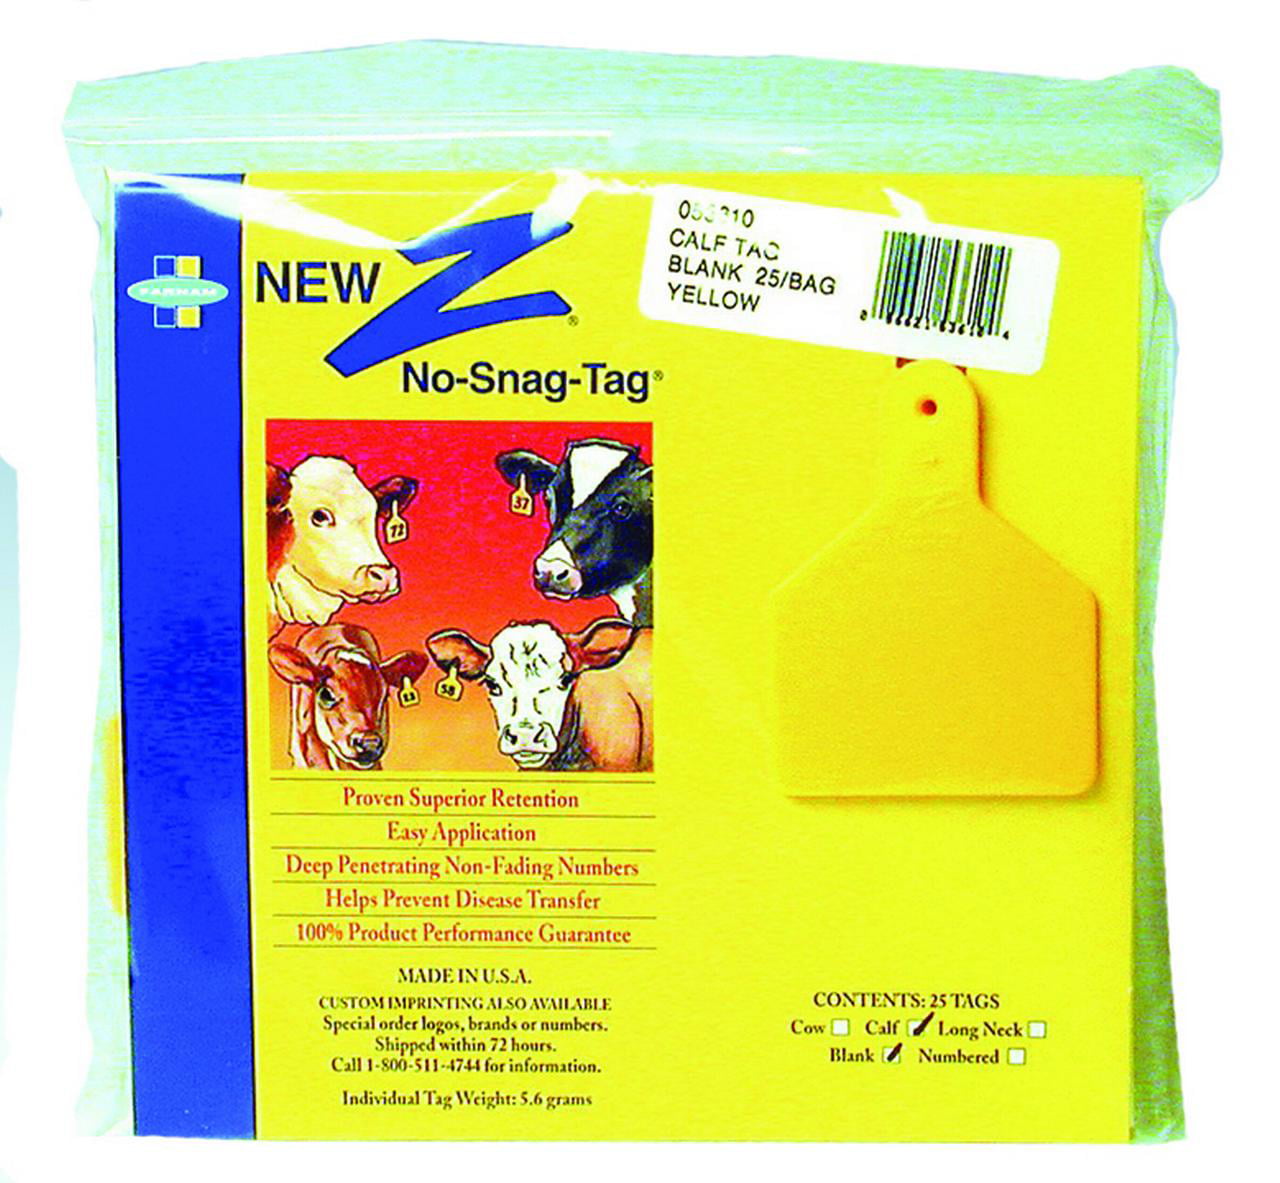 Z Tags Calf Blank Yellow 25 Count Easy Application Prevent Disease Transfer 